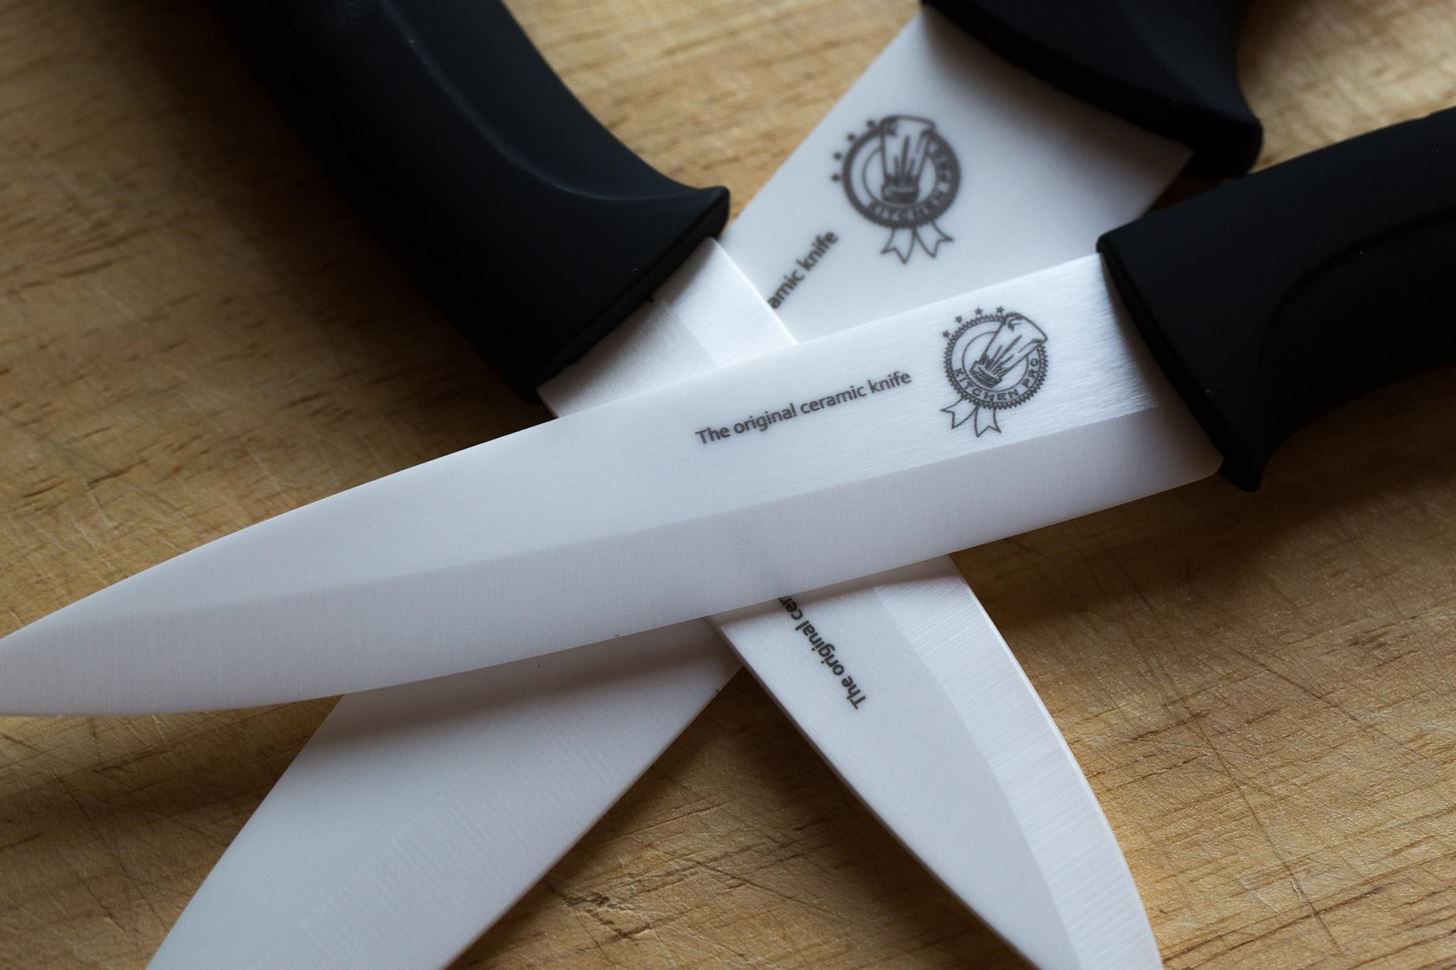 Food Tool Friday: The Cutting-Edge Allure of Ceramic Knives